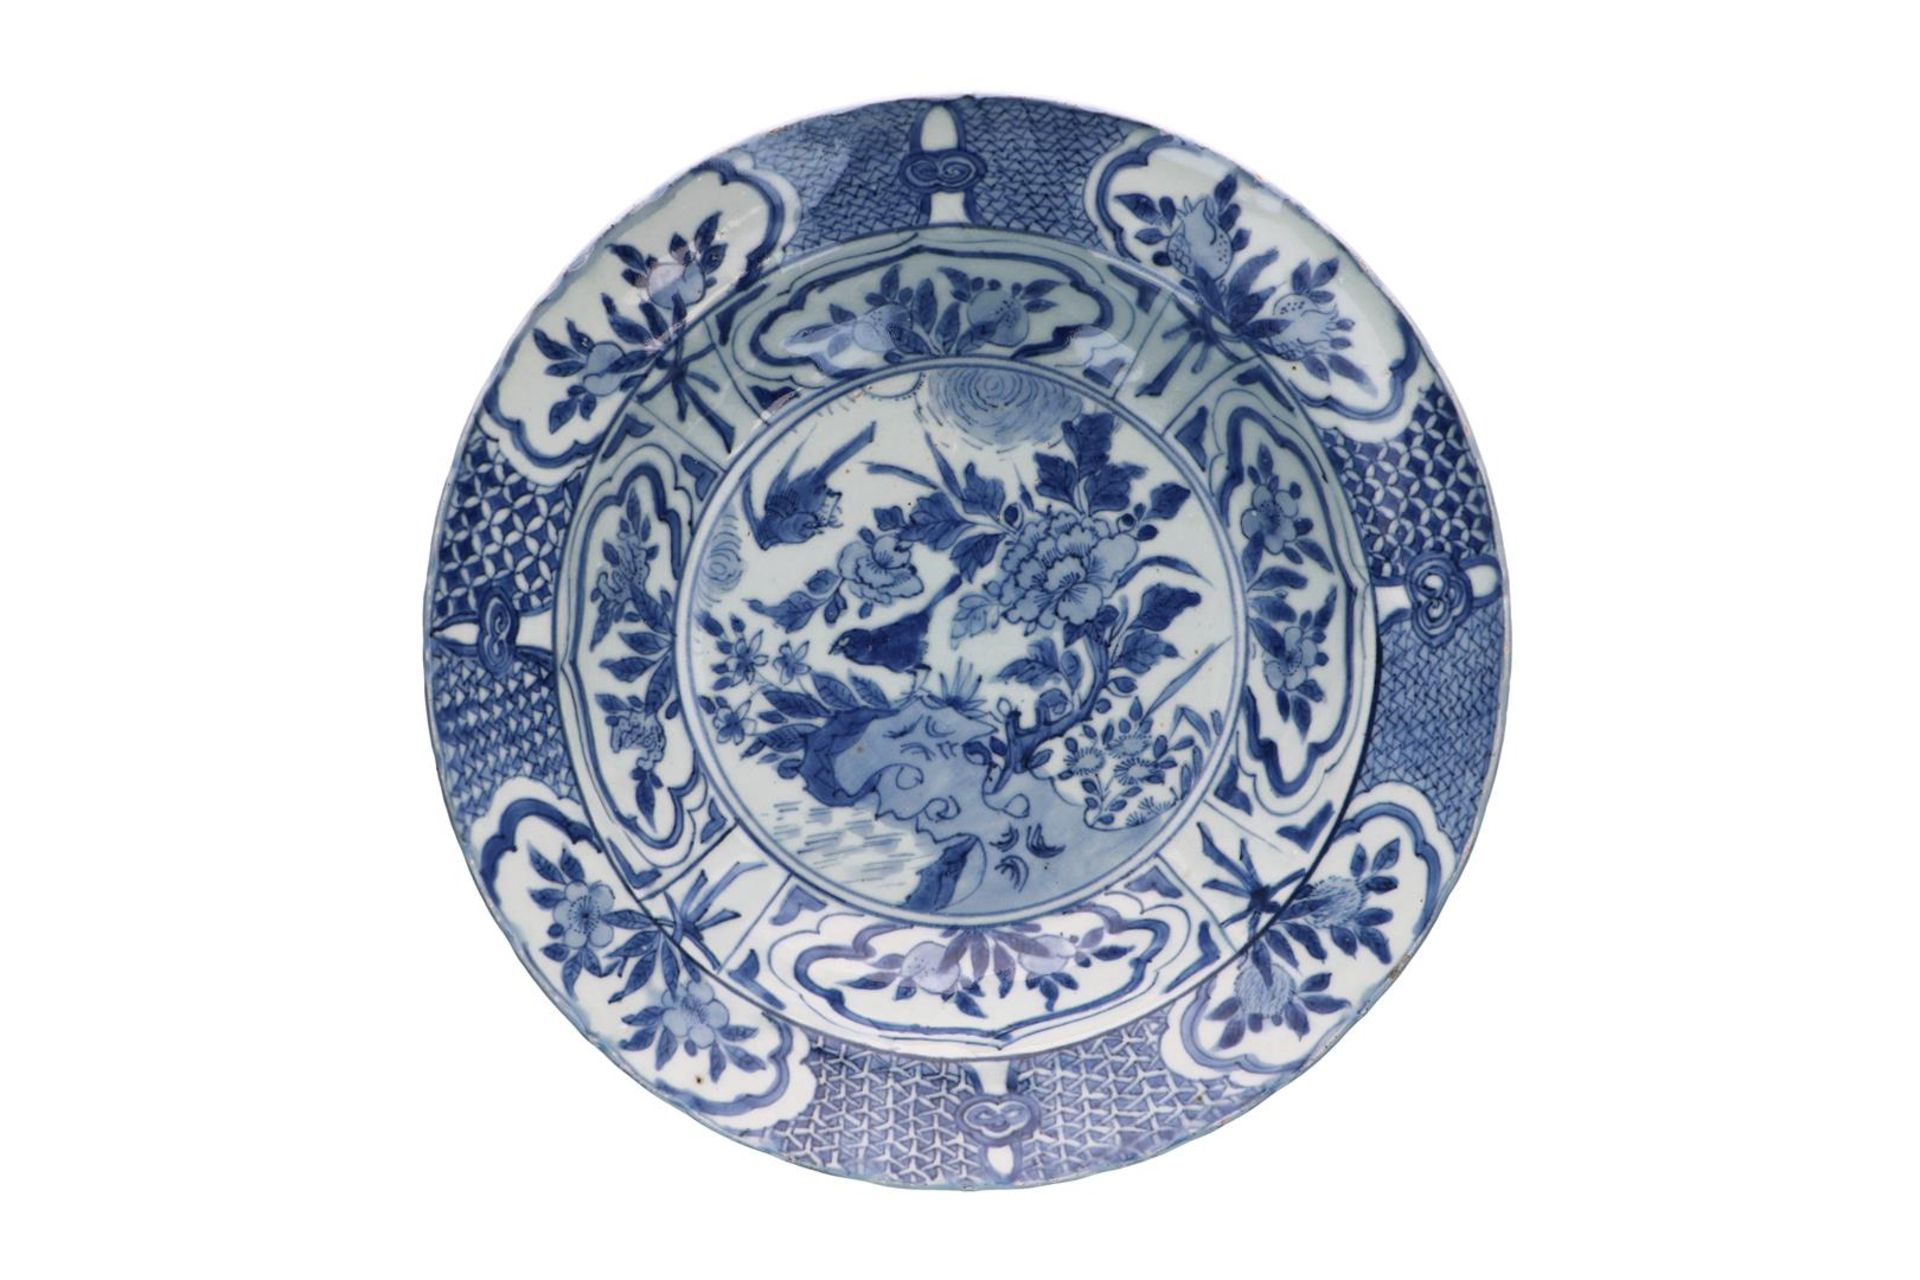 A blue and white 'kraak' porcelain deep dish, decorated with flowers, fruits and birds. Unmarked.